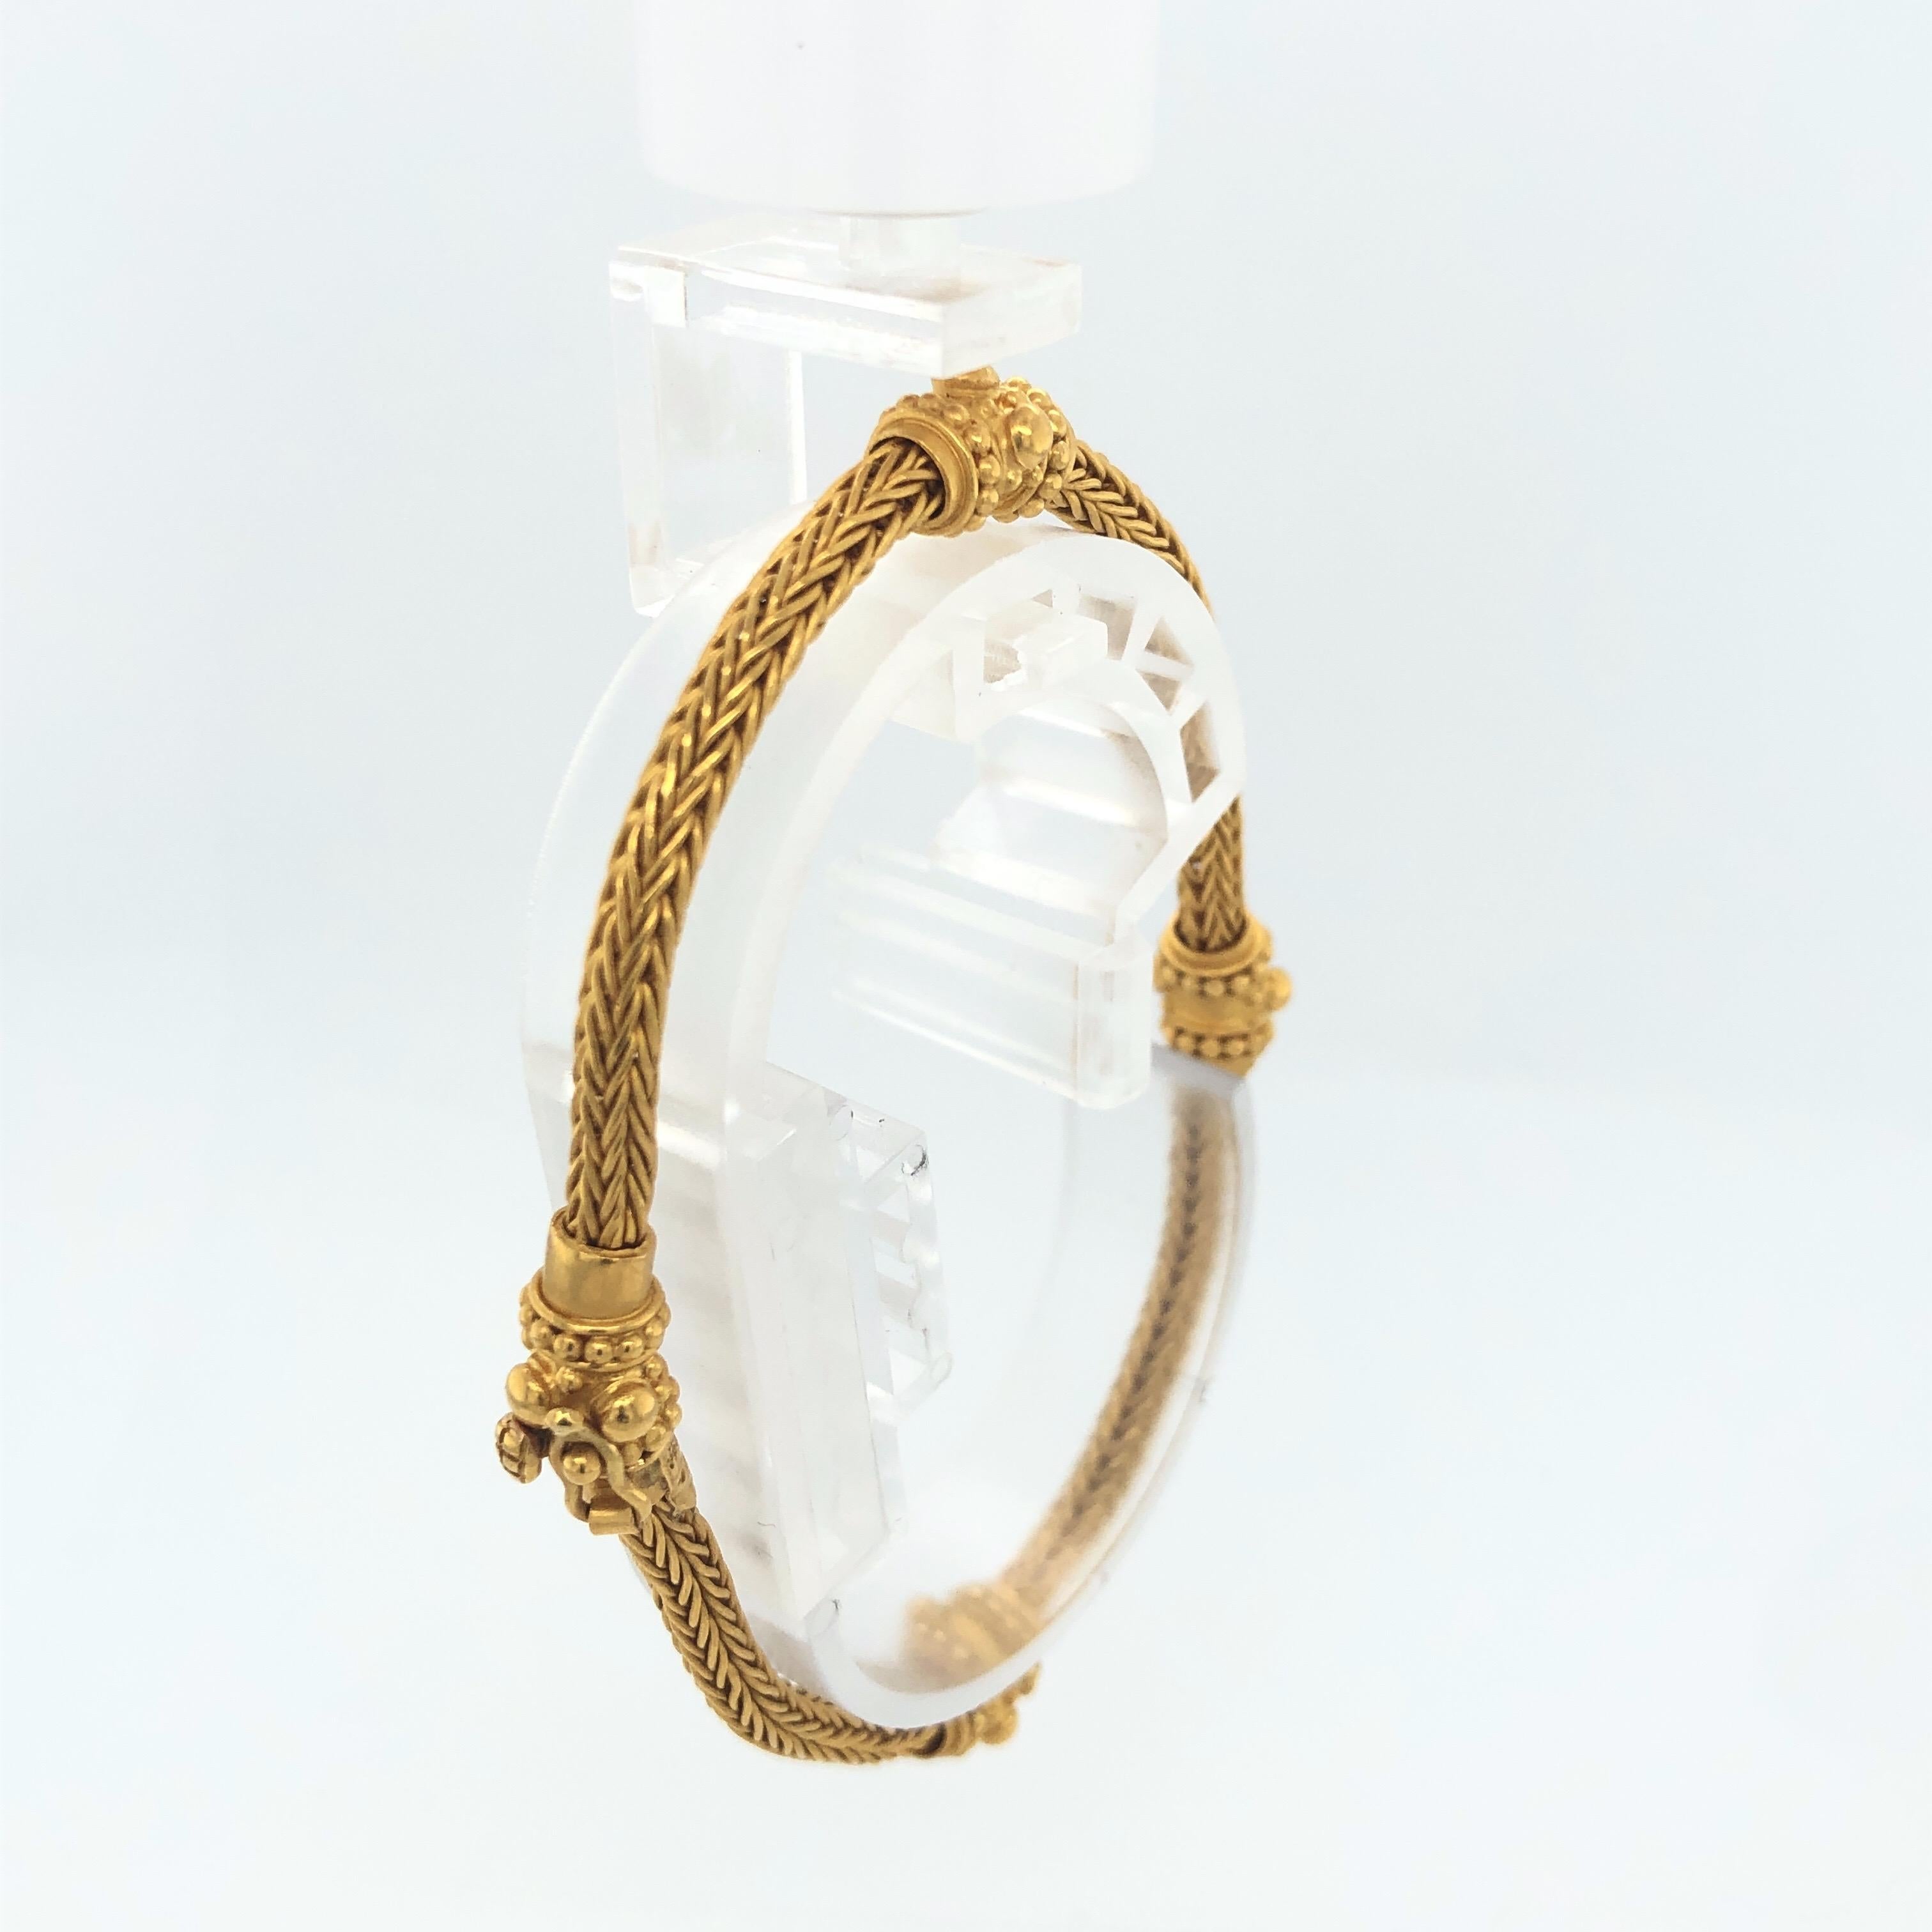 Carolyn Tyler 22K Yellow Gold Braided Etrusca Bracelet.  7.25 inches.  This soft bracelet is studded with gold stations with the intricate detailed granulation that Carolyn is so famous for.  Each piece has a beauty and resonance of it's own with